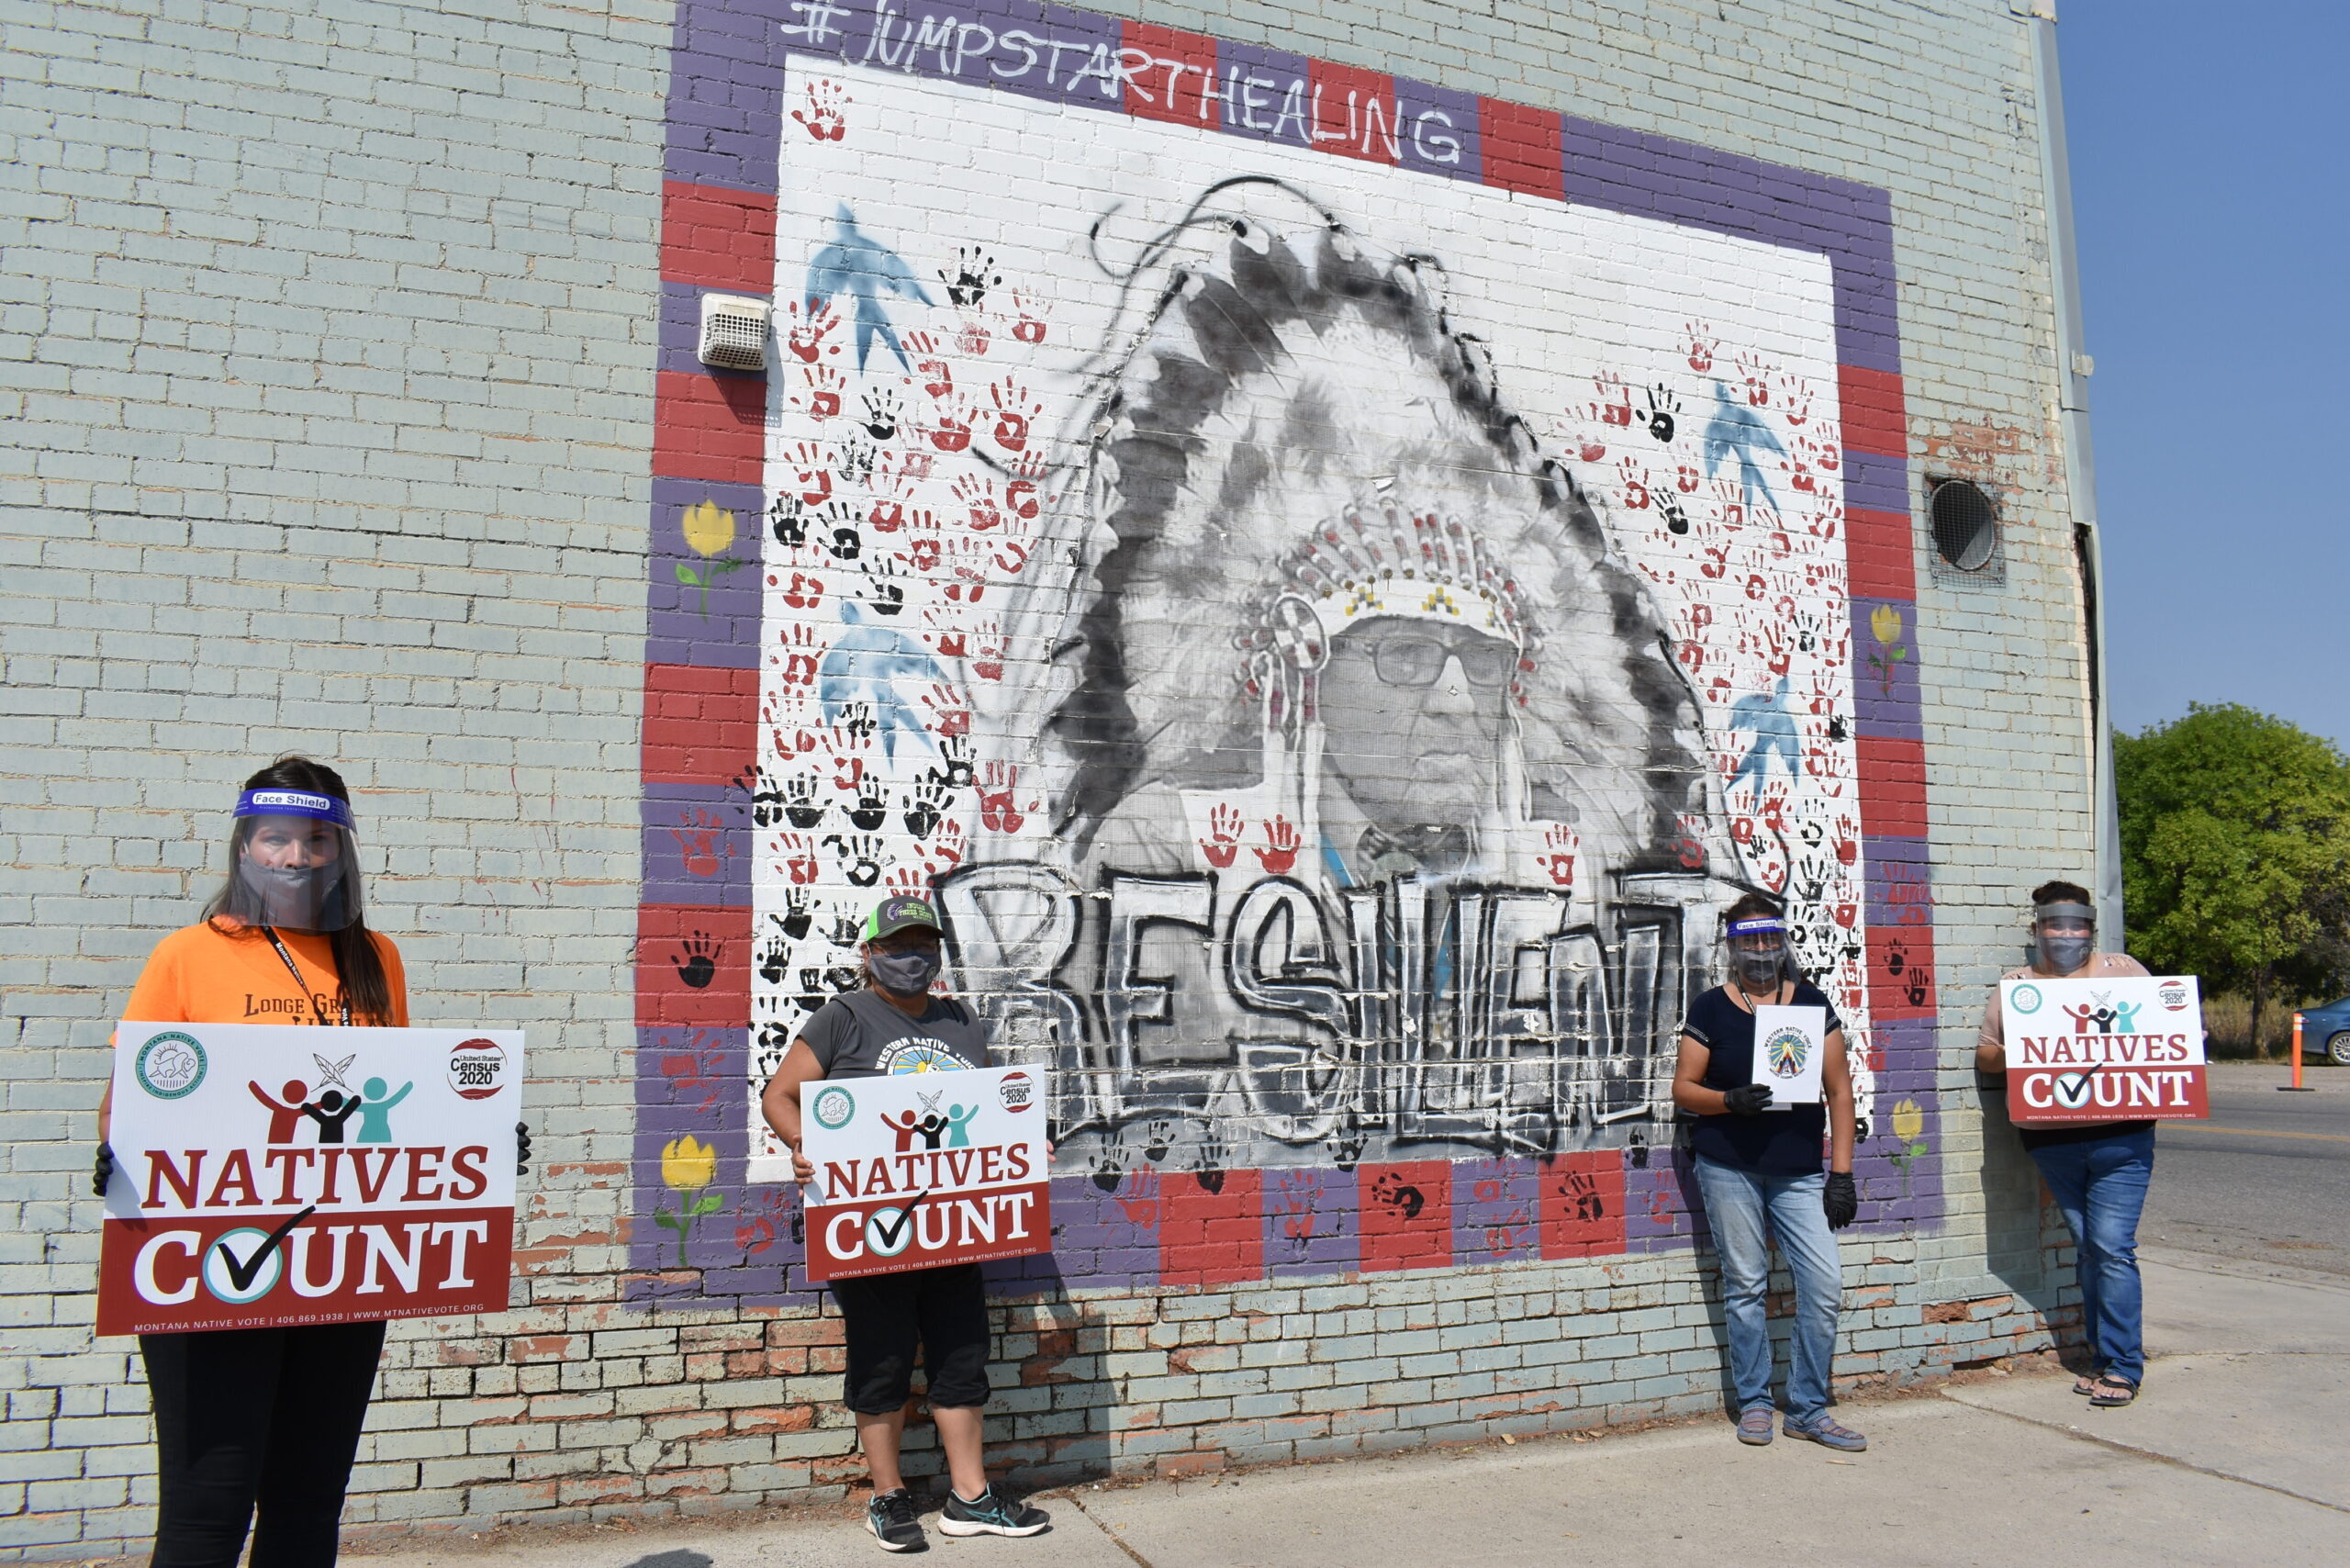 FILE - Activists hold signs promoting Native American participation in the U.S. census in front of ...